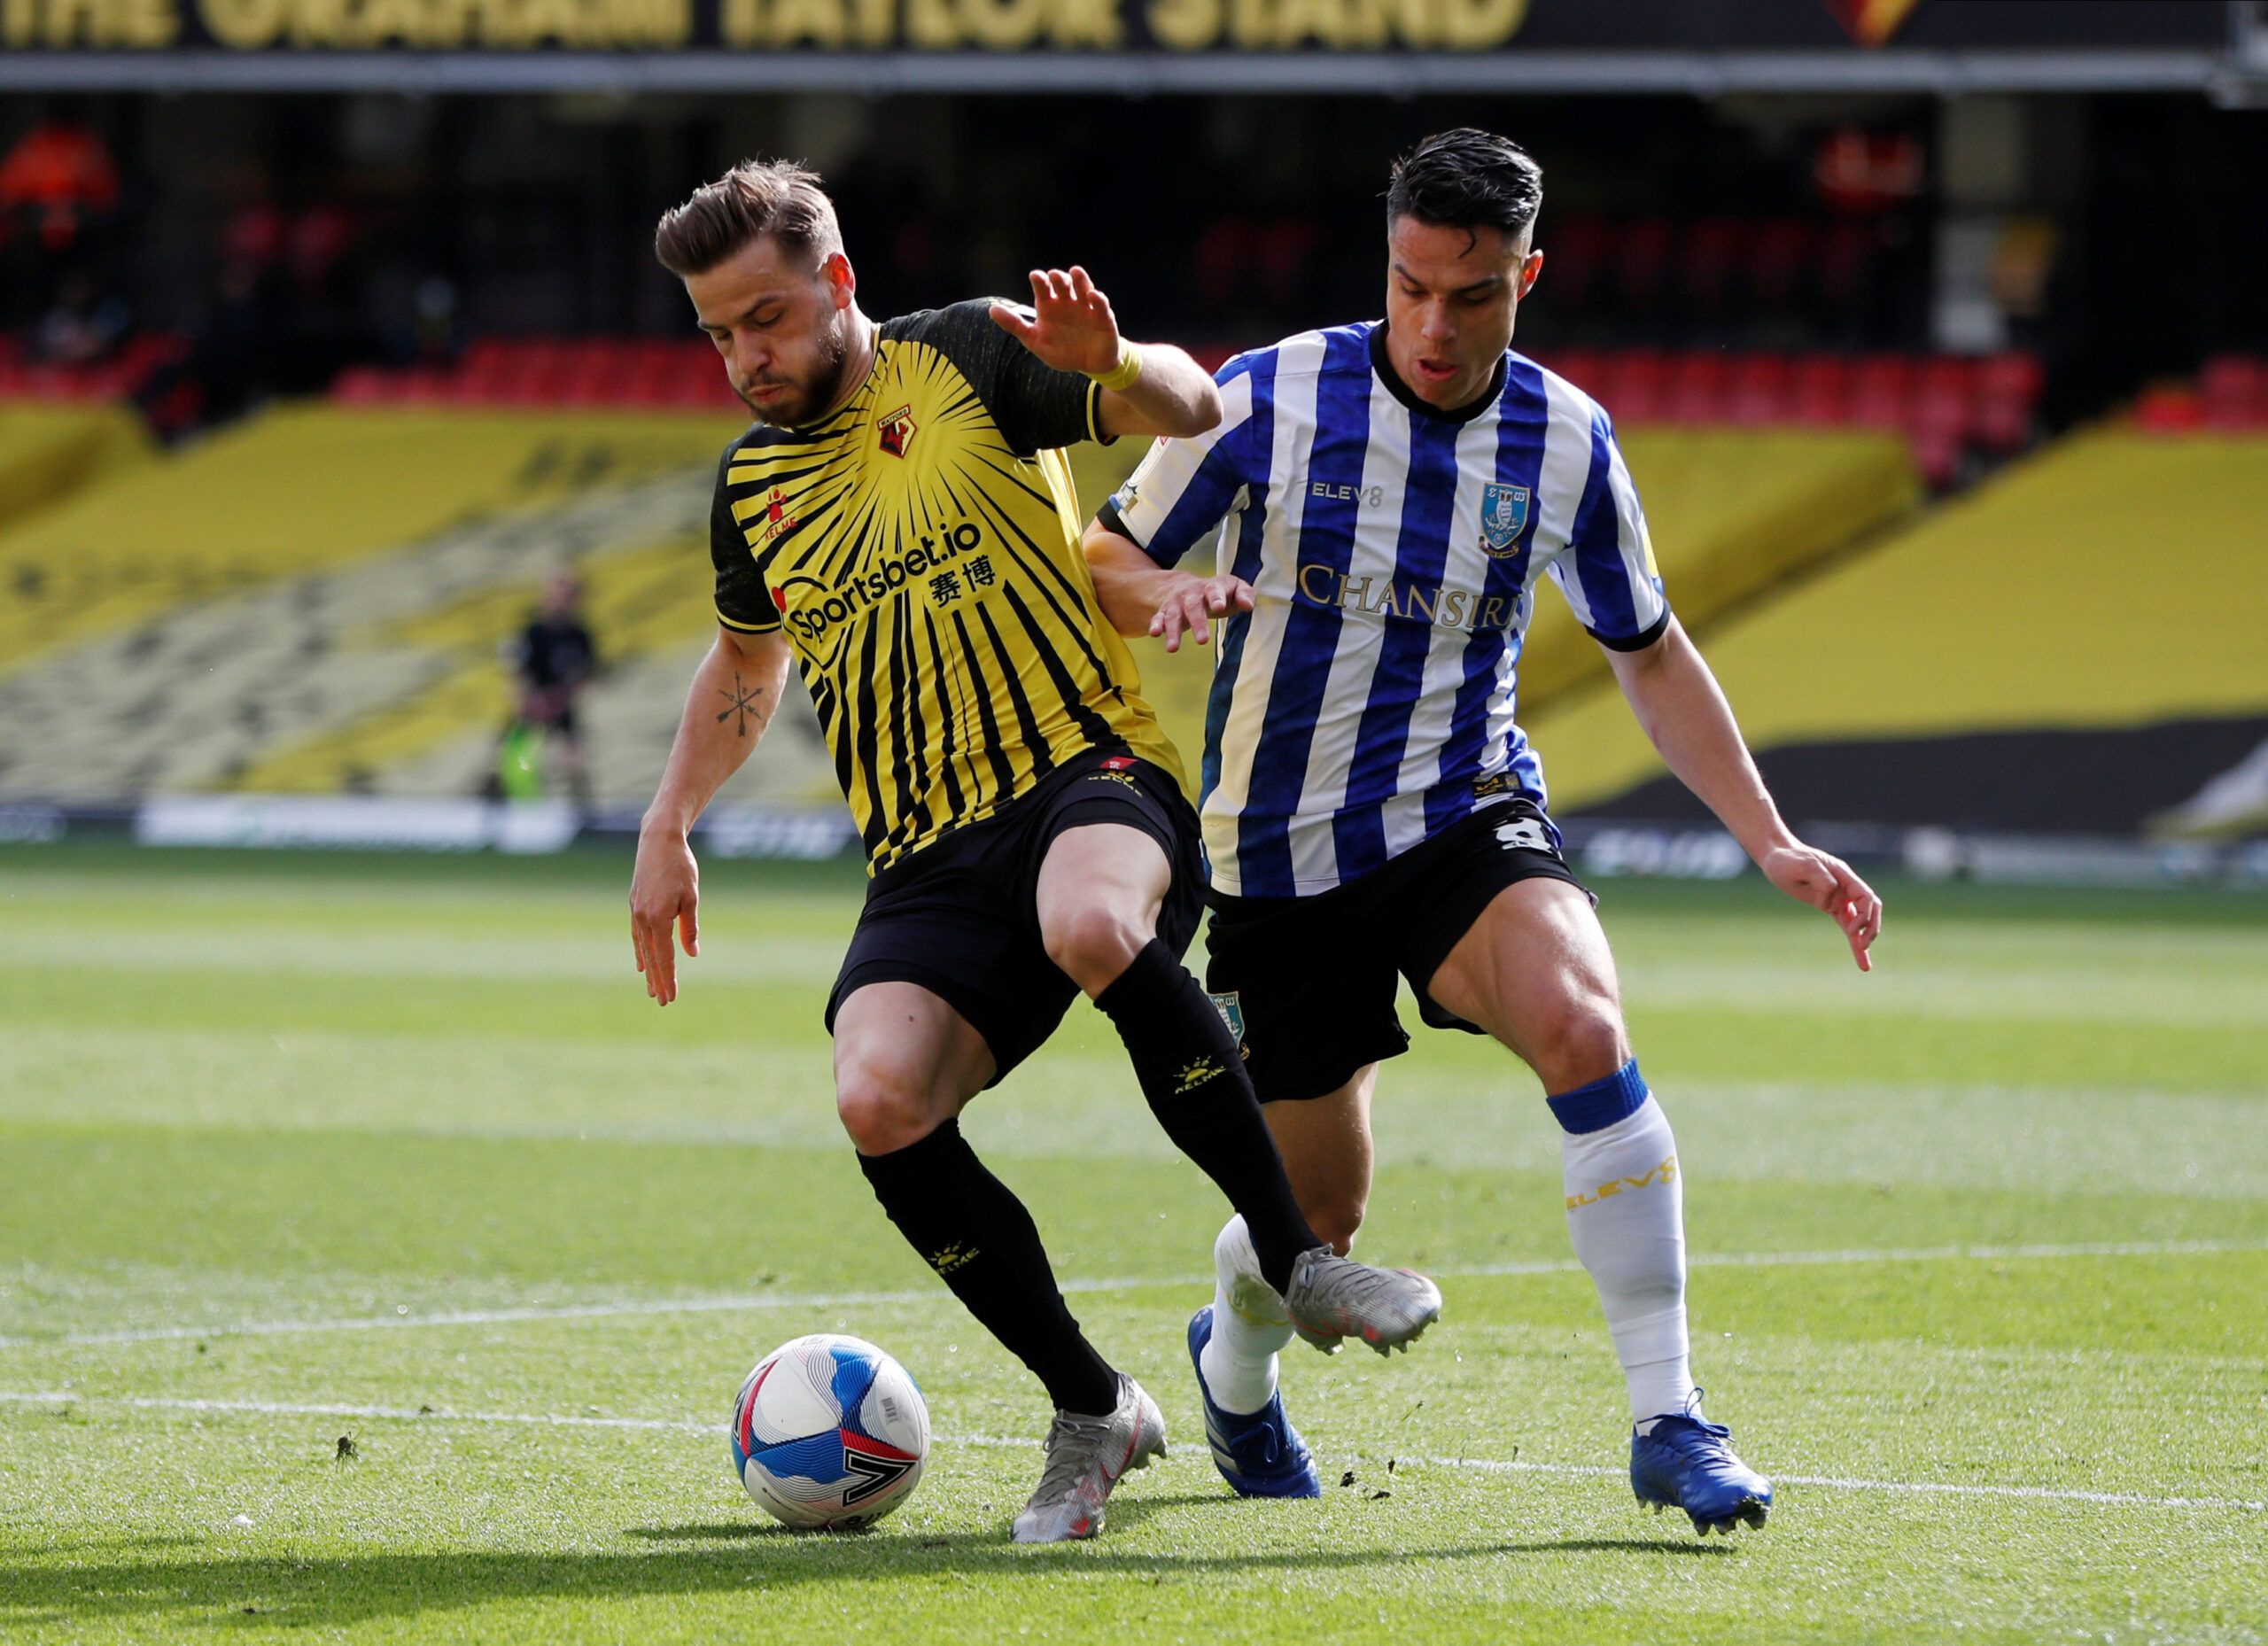 Soccer Football - Championship - Watford v Sheffield Wednesday - Vicarage Road, Watford, Britain - April 2, 2021  Watford's Philip Zinckernagel in action with Sheffield Wednesday's Joey Pelupessy  Action Images/Paul Childs  EDITORIAL USE ONLY. No use with unauthorized audio, video, data, fixture lists, club/league logos or 